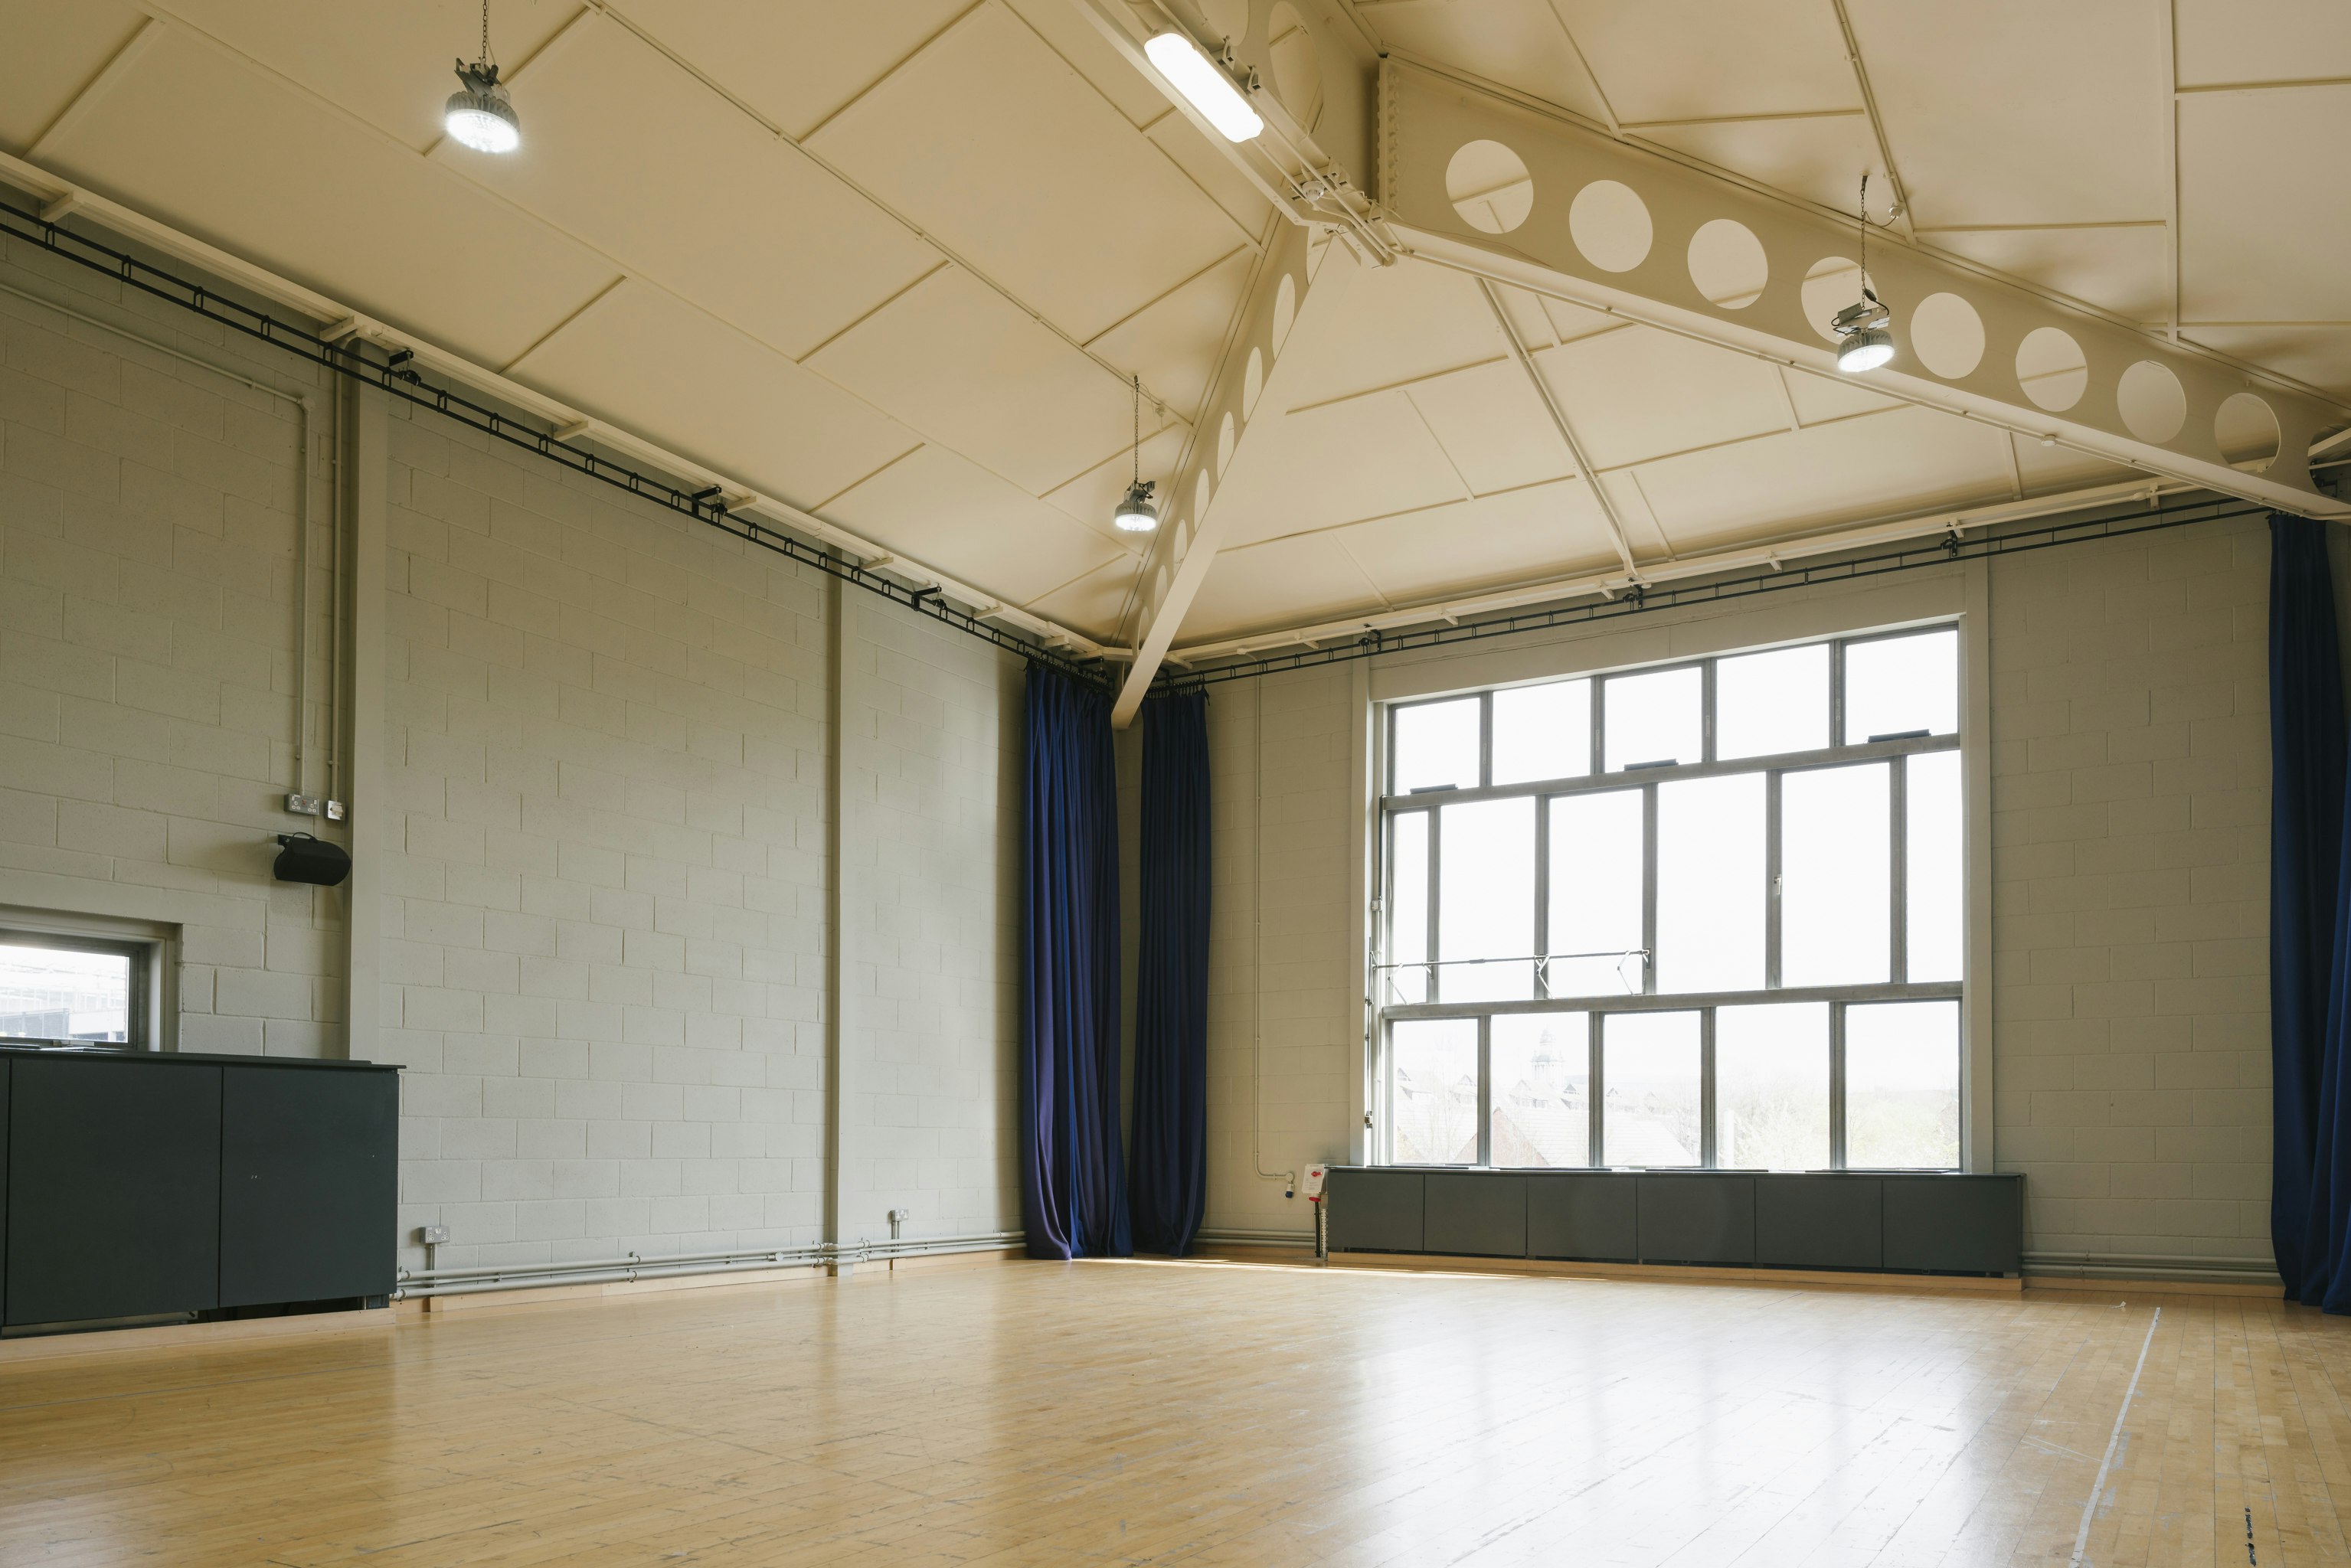 Filming Locations Venues in Manchester - Contact Theatre